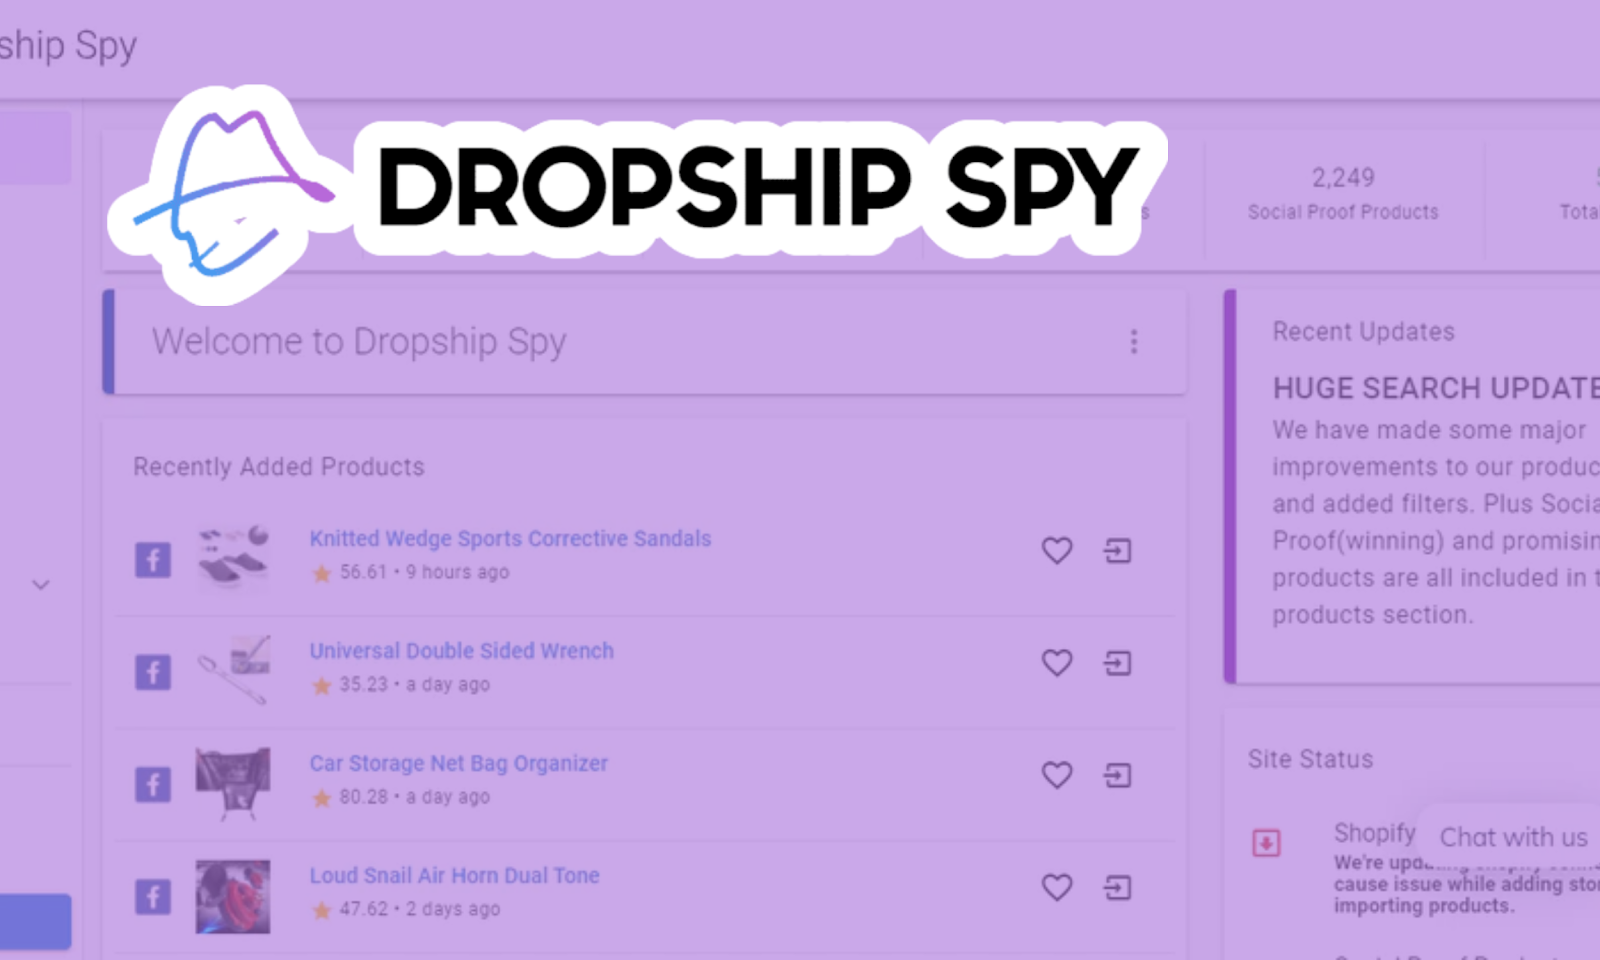 Dropship Spy: Dropshipping Software: Overview